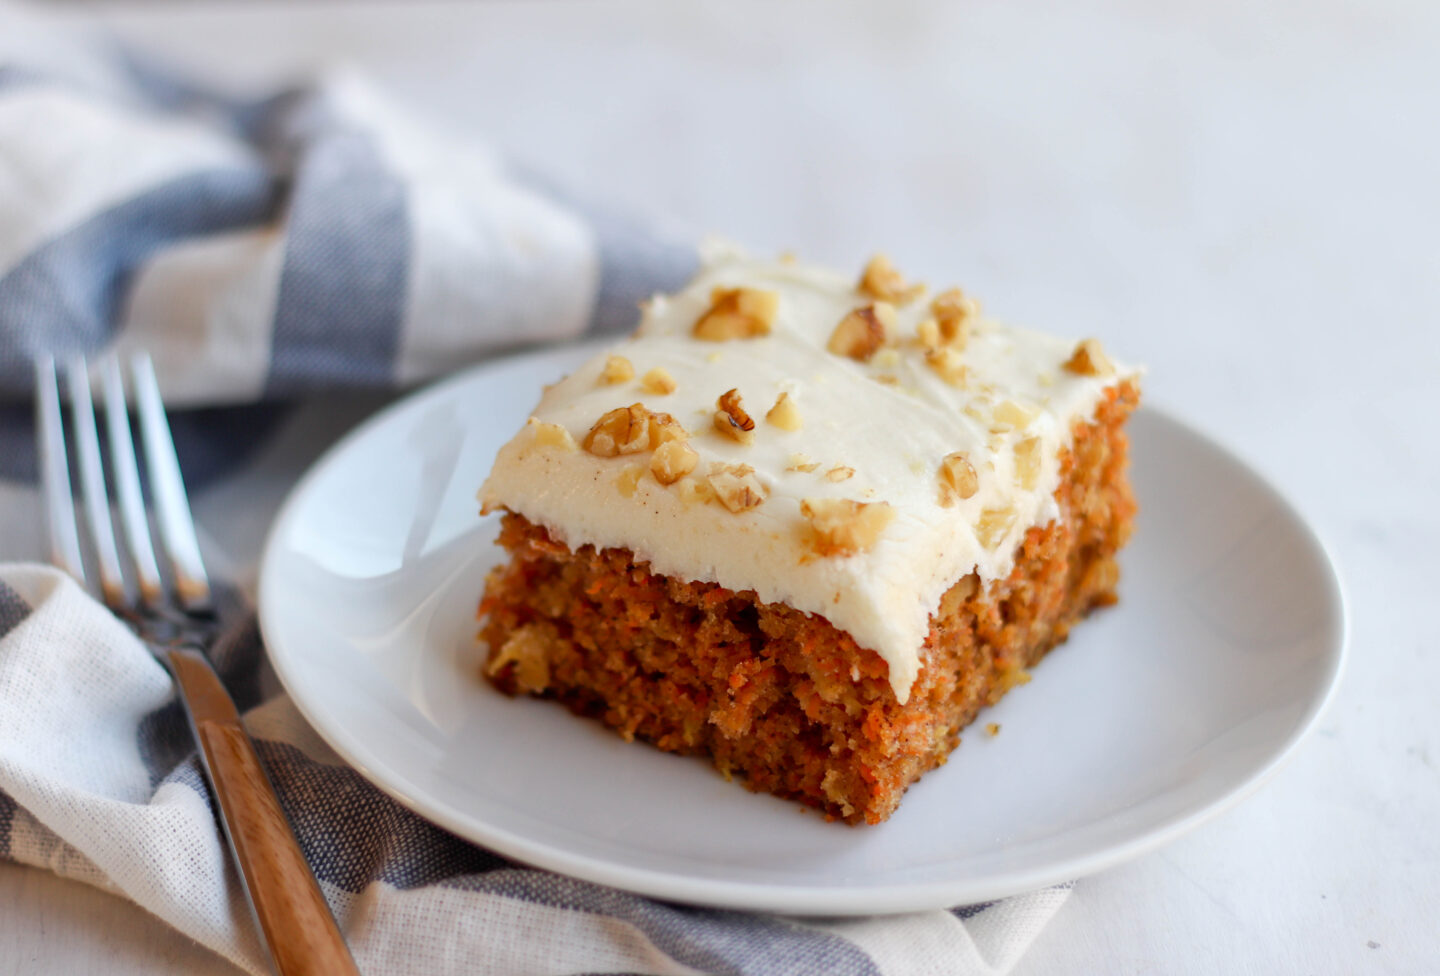 CARROT CAKE WITH CREAM CHEESE FROSTING